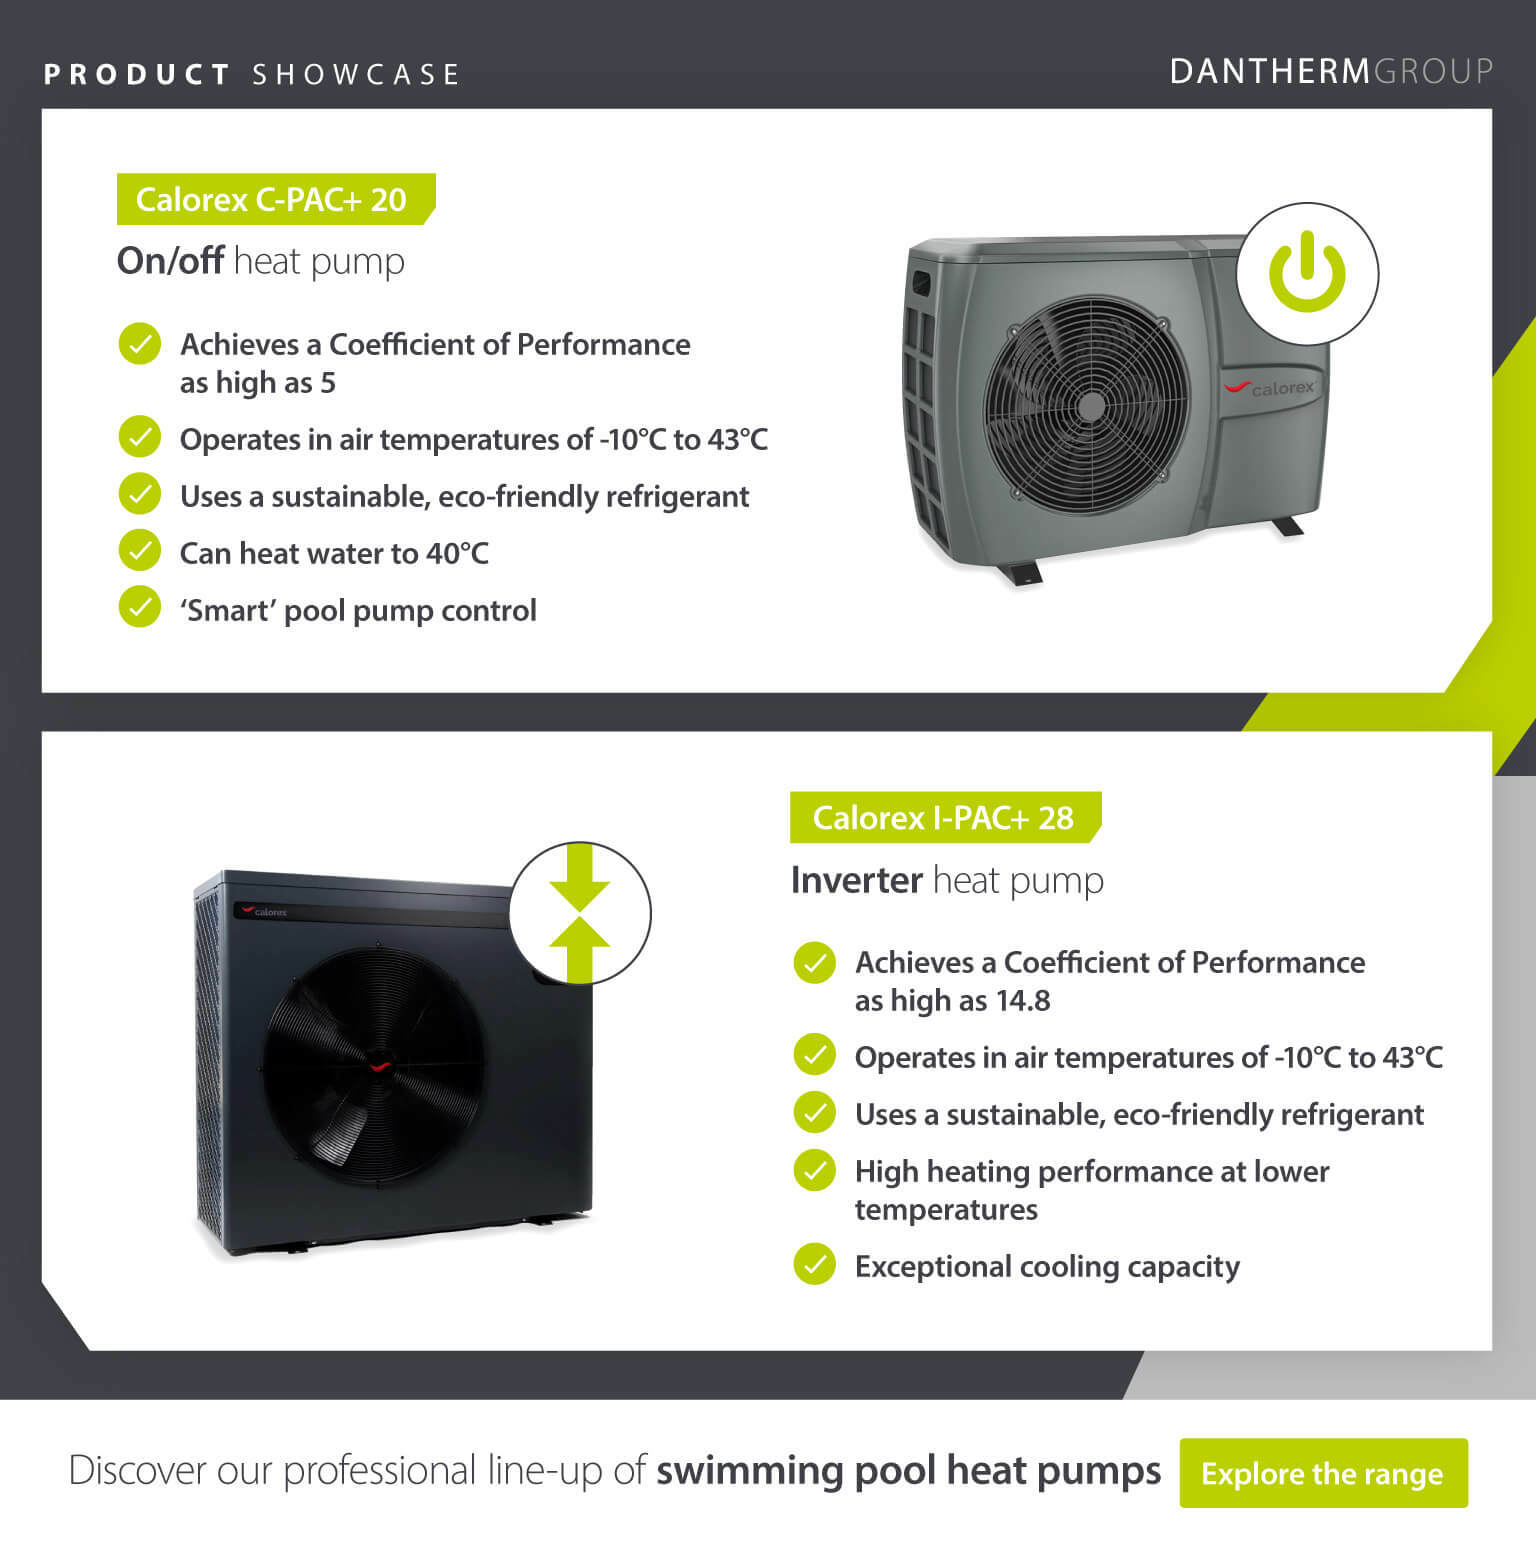 Product showcase comparing 2 swimming pool heat pump models and features